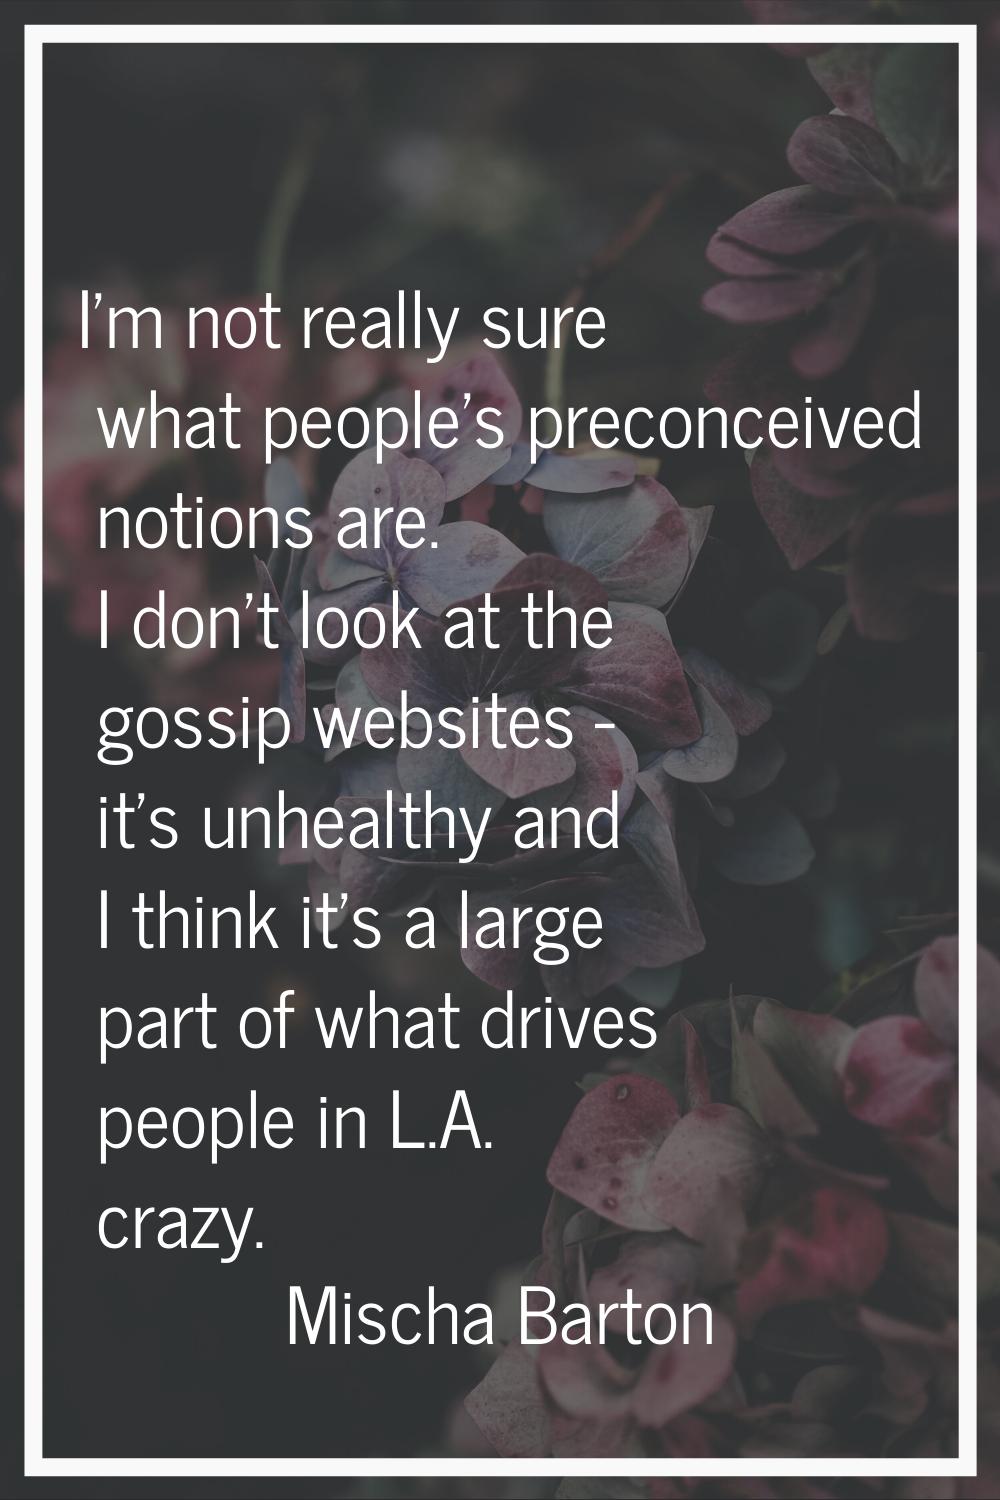 I'm not really sure what people's preconceived notions are. I don't look at the gossip websites - i